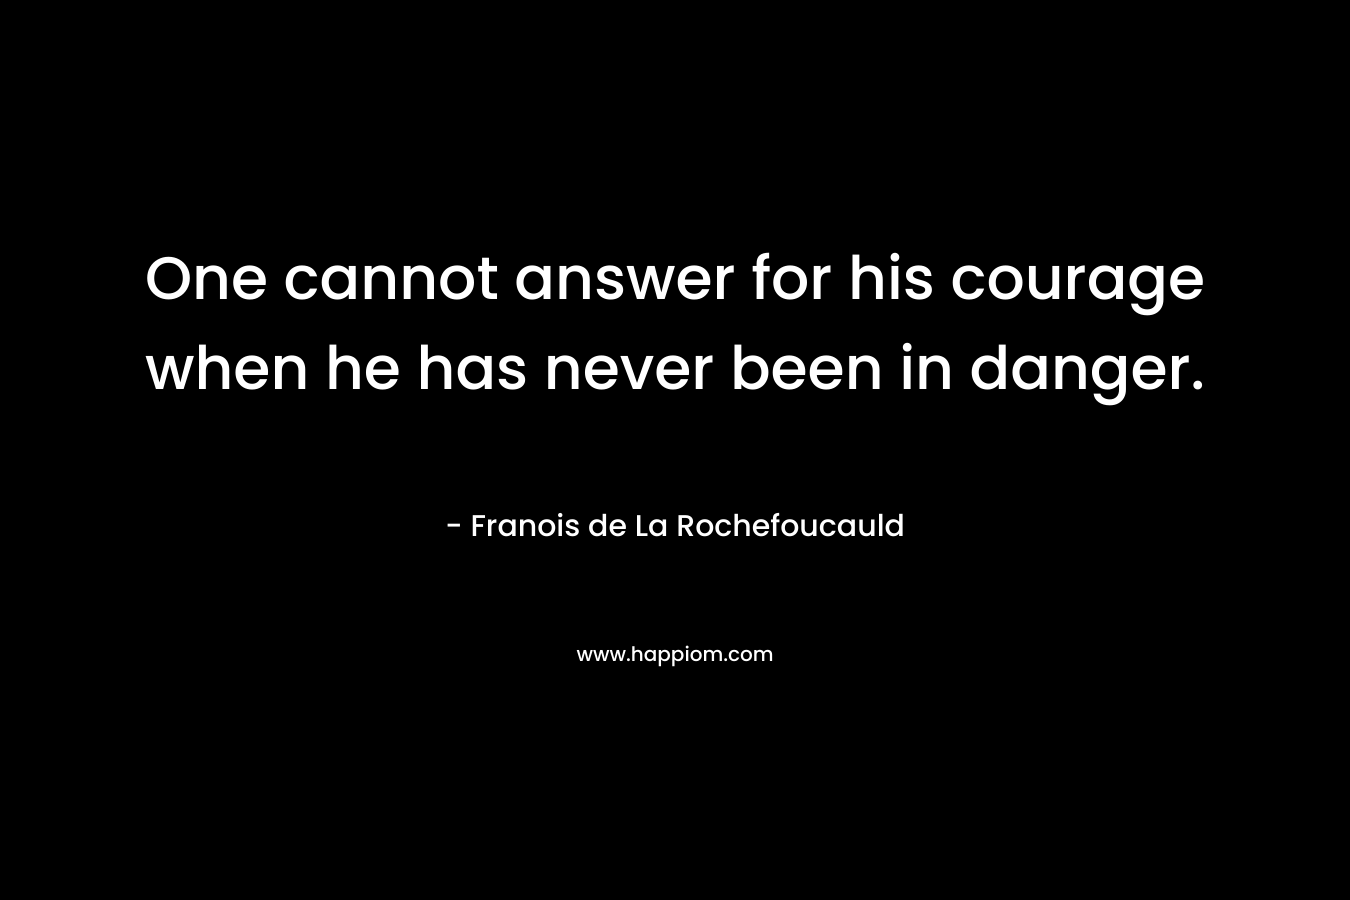 One cannot answer for his courage when he has never been in danger.